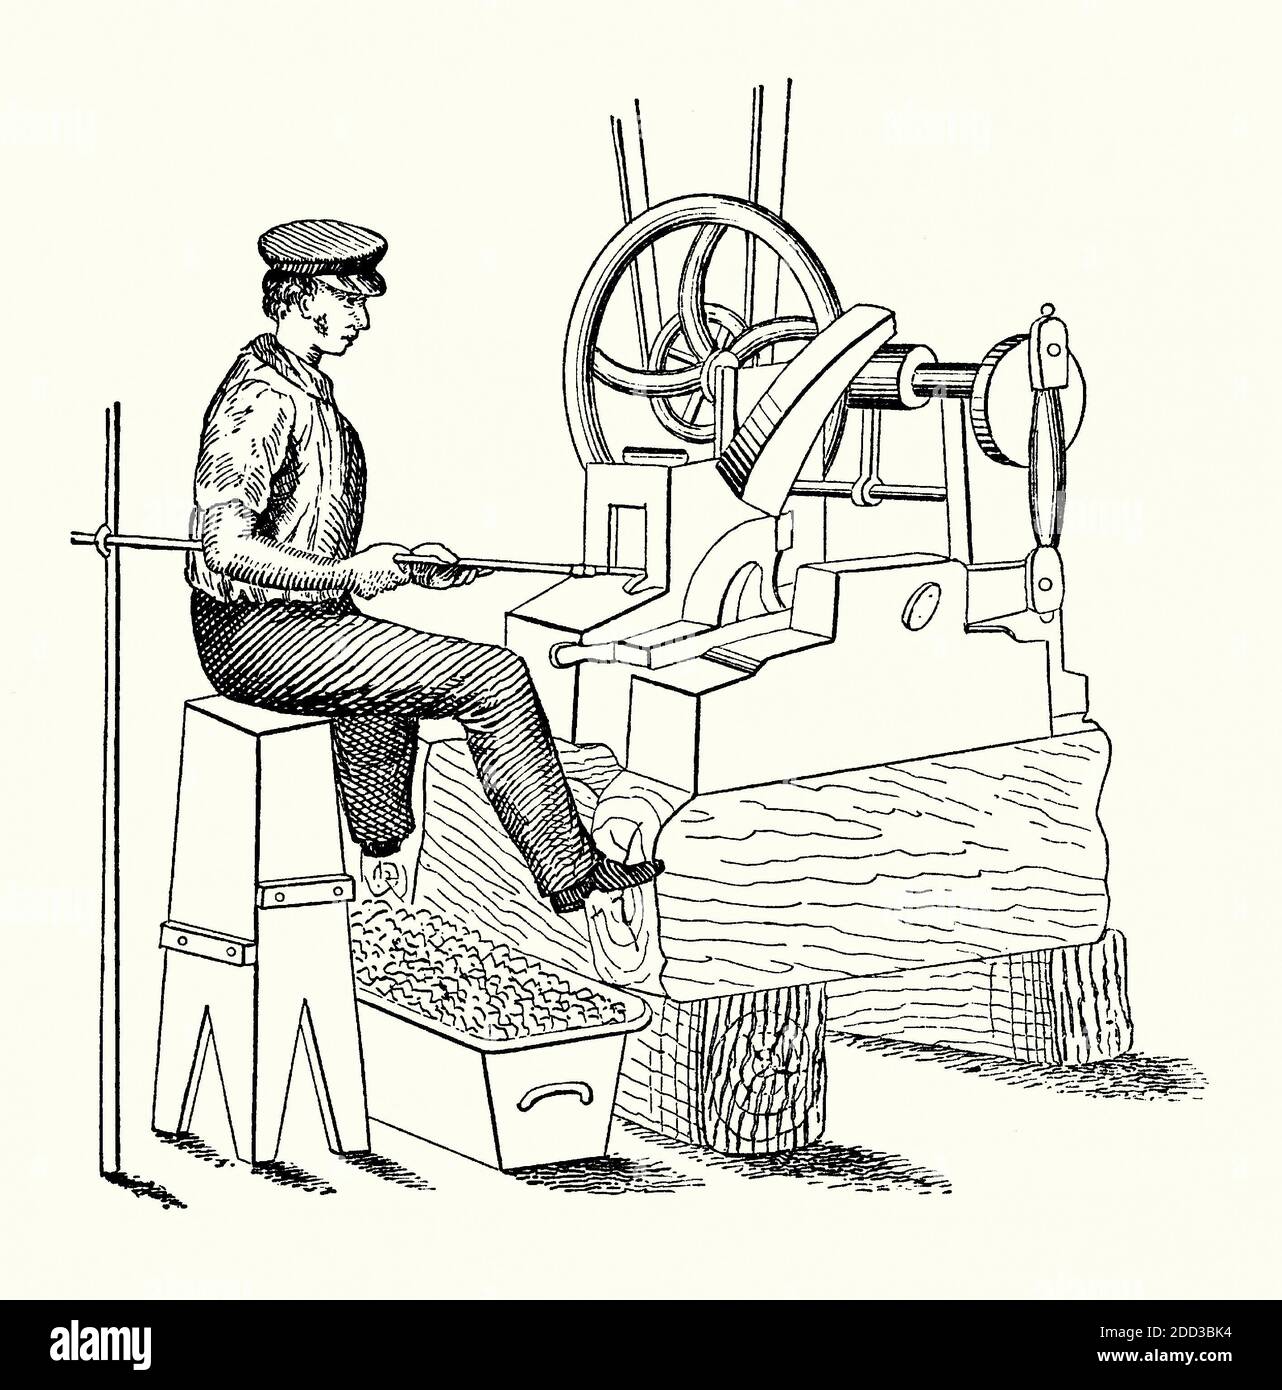 An old engraving of nail-making machine. It is from a Victorian mechanical engineering book of the 1880s. The cut-nail process was patented in the USA by Jacob Perkins in 1795. Here a sheet of iron is hand-fed into the cutting device, the blade contained within a box. The machinery is belt driven. The cut nails were collected in a tub below. Nails are also formed by using wire rather than sheet metal. Stock Photo